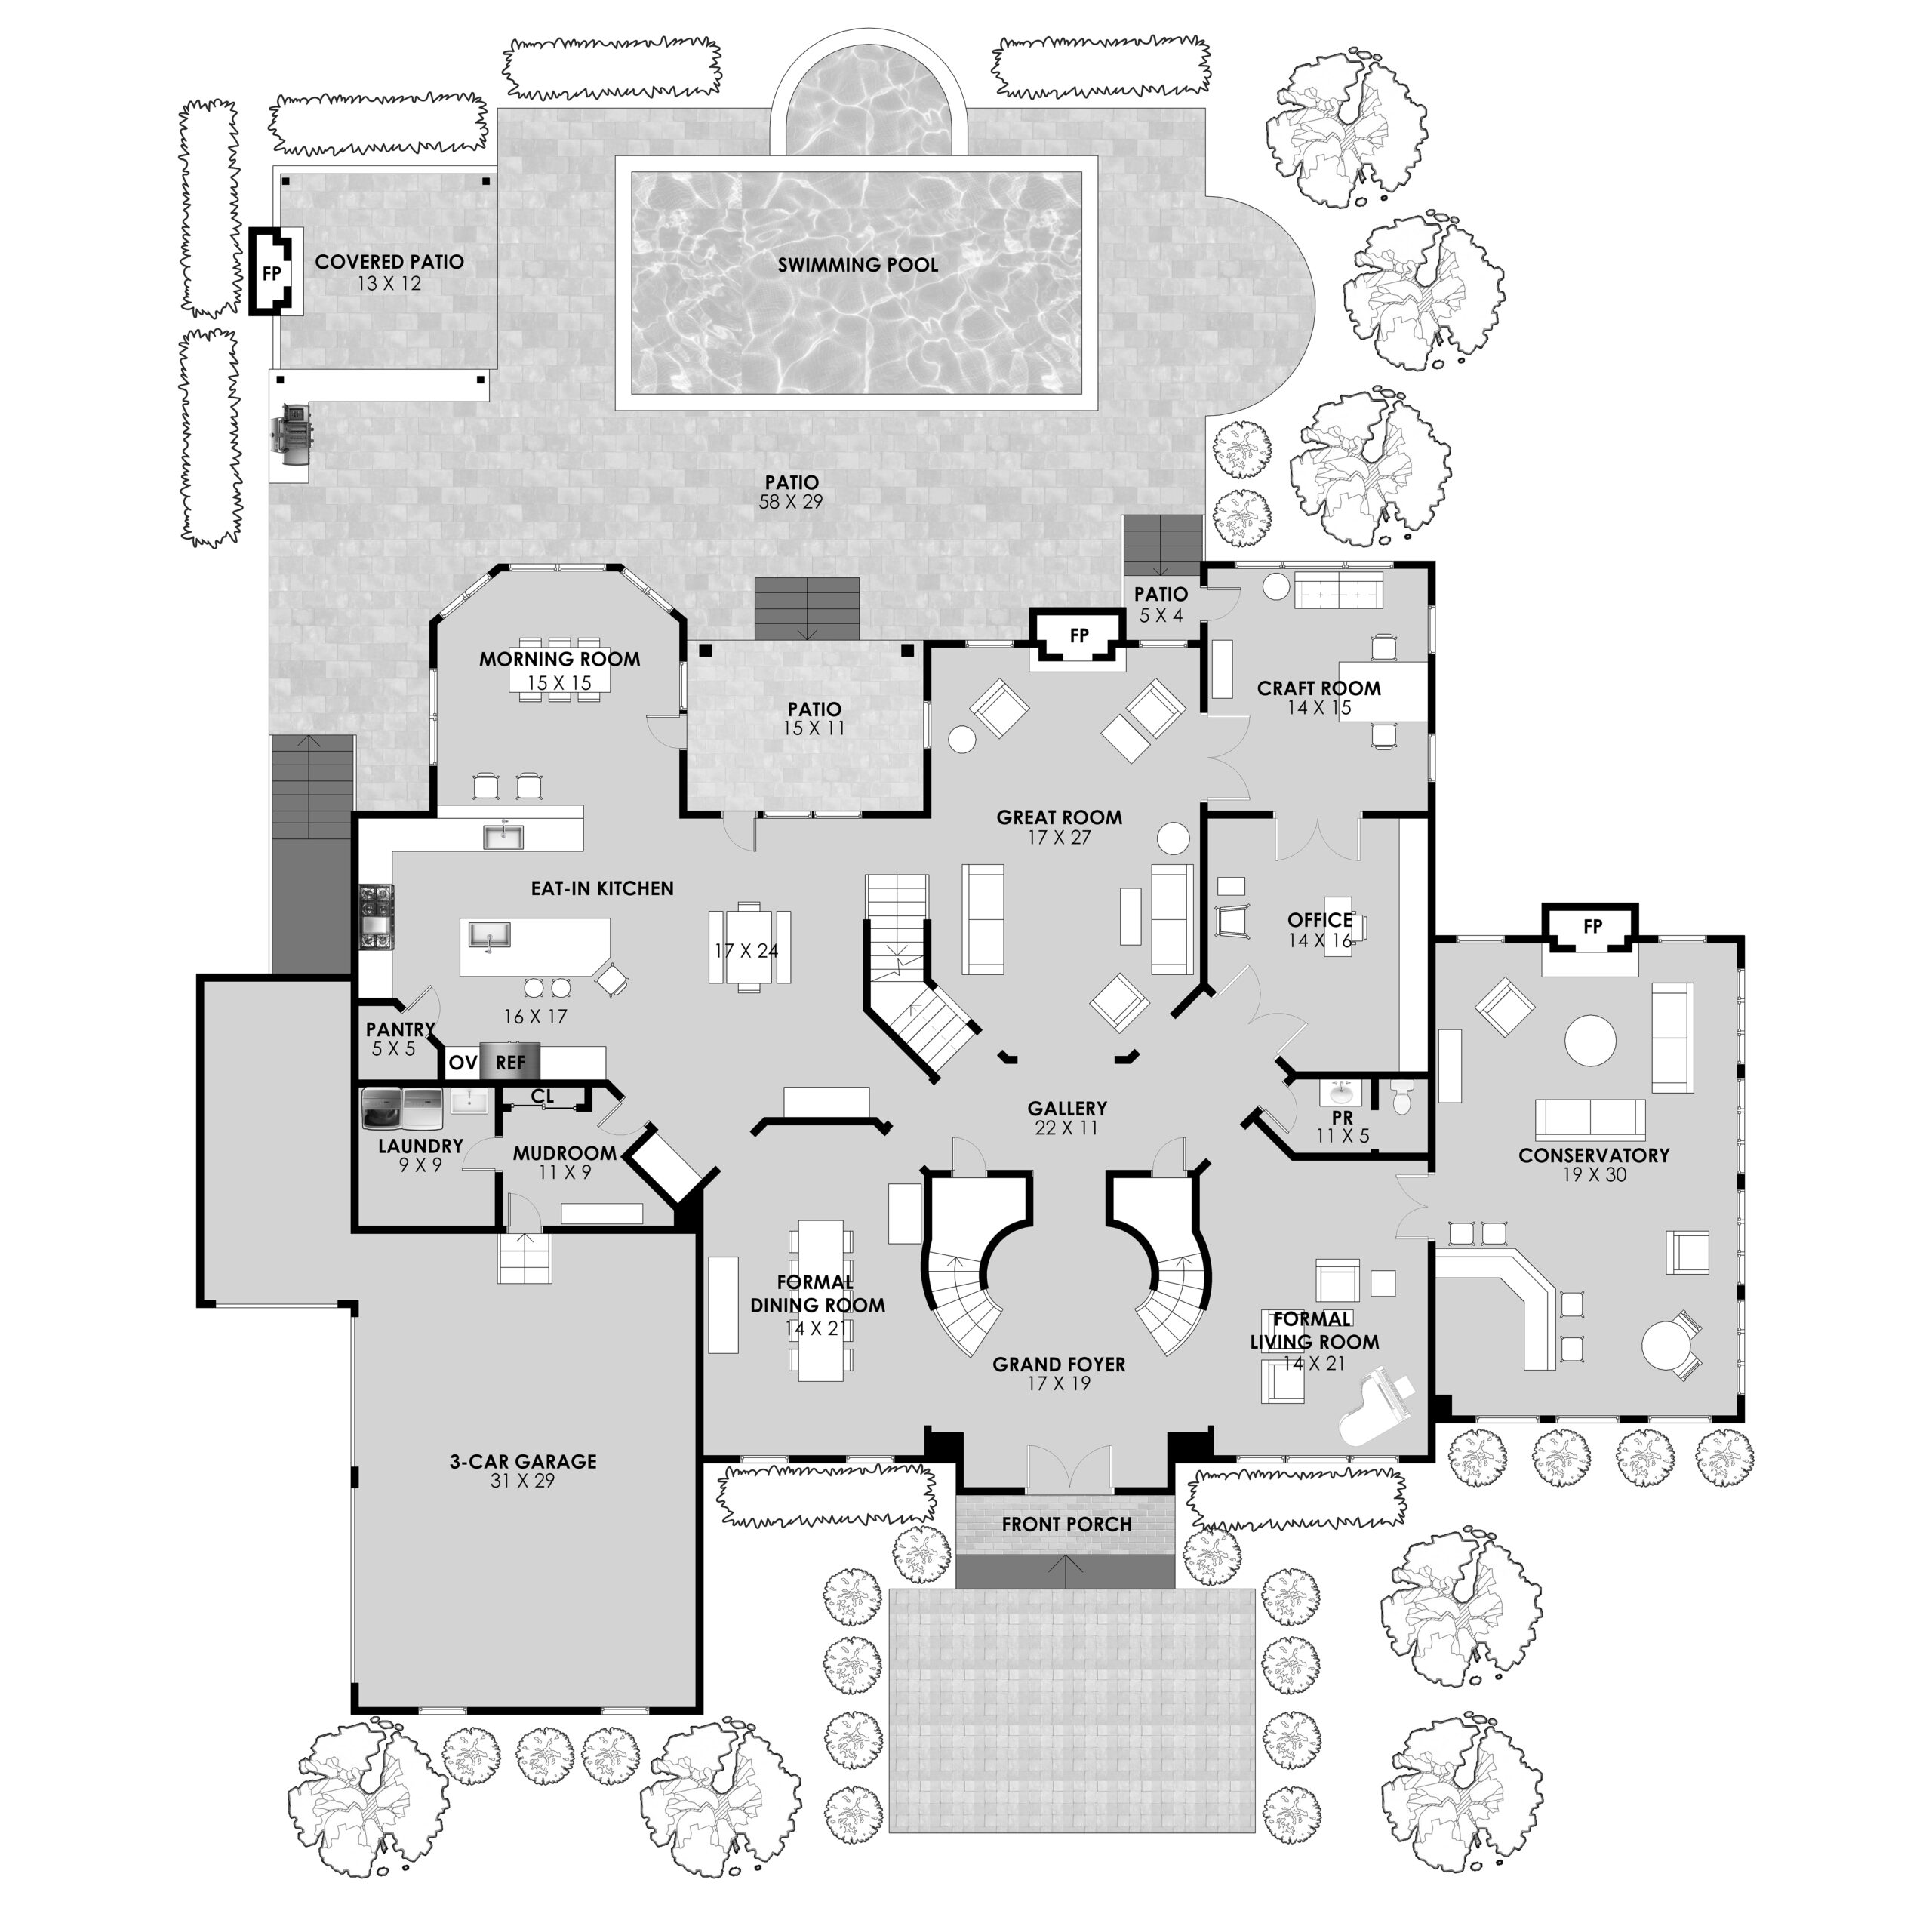 high-detail 2D floor plans done by Sky Blue Media showing details and exterior features